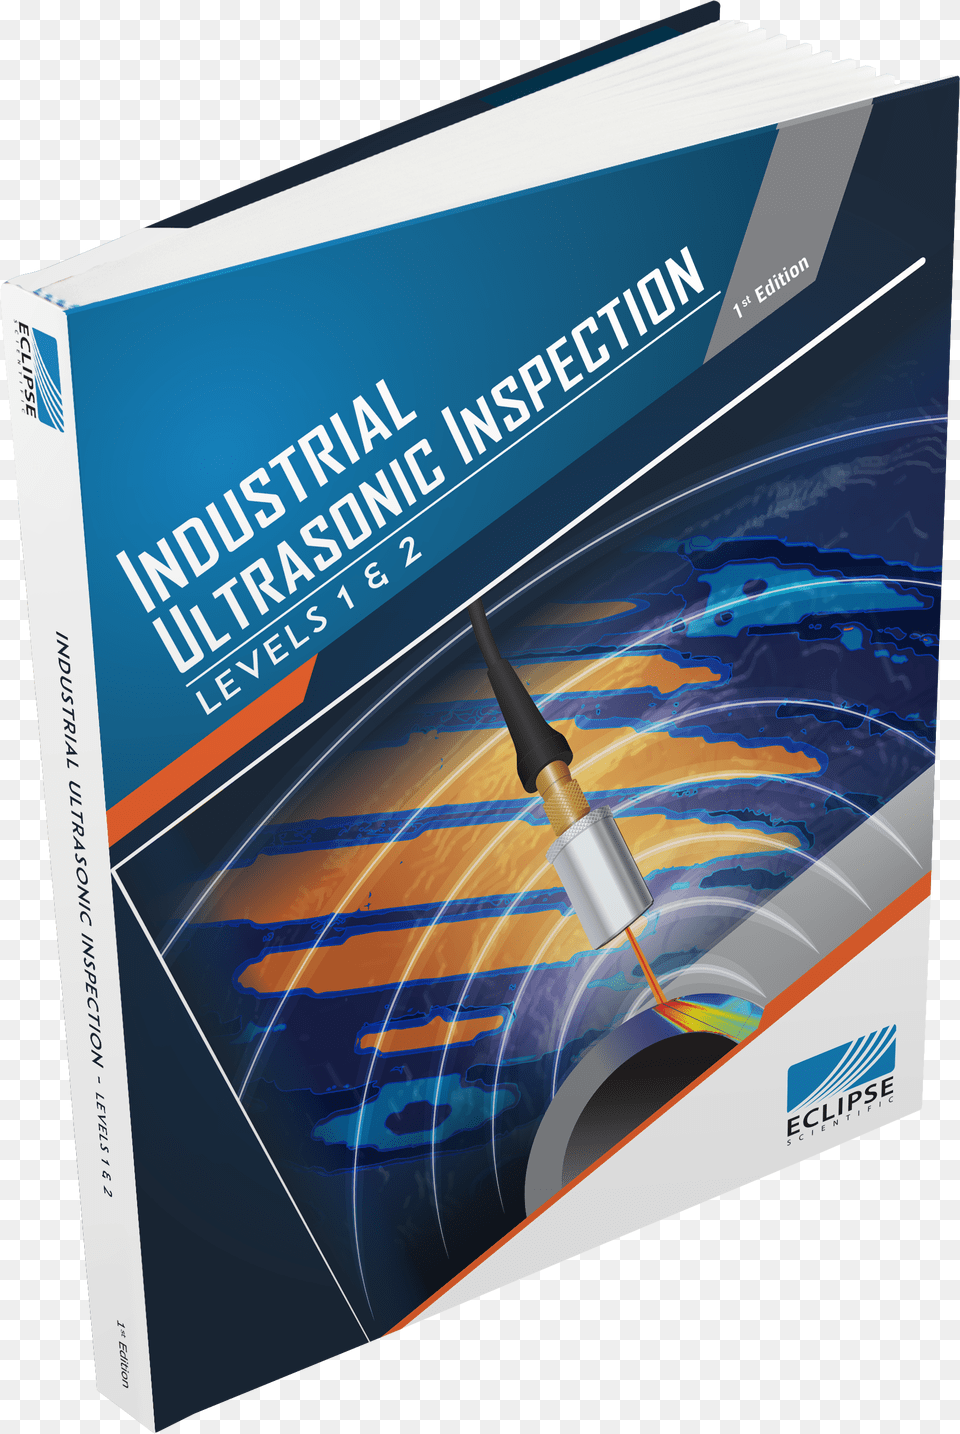 Industrial Ultrasonic Inspection Levels 1 Amp Industrial Ultrasonic Inspection Levels 1 And, Book, Publication, Advertisement, Poster Free Png Download